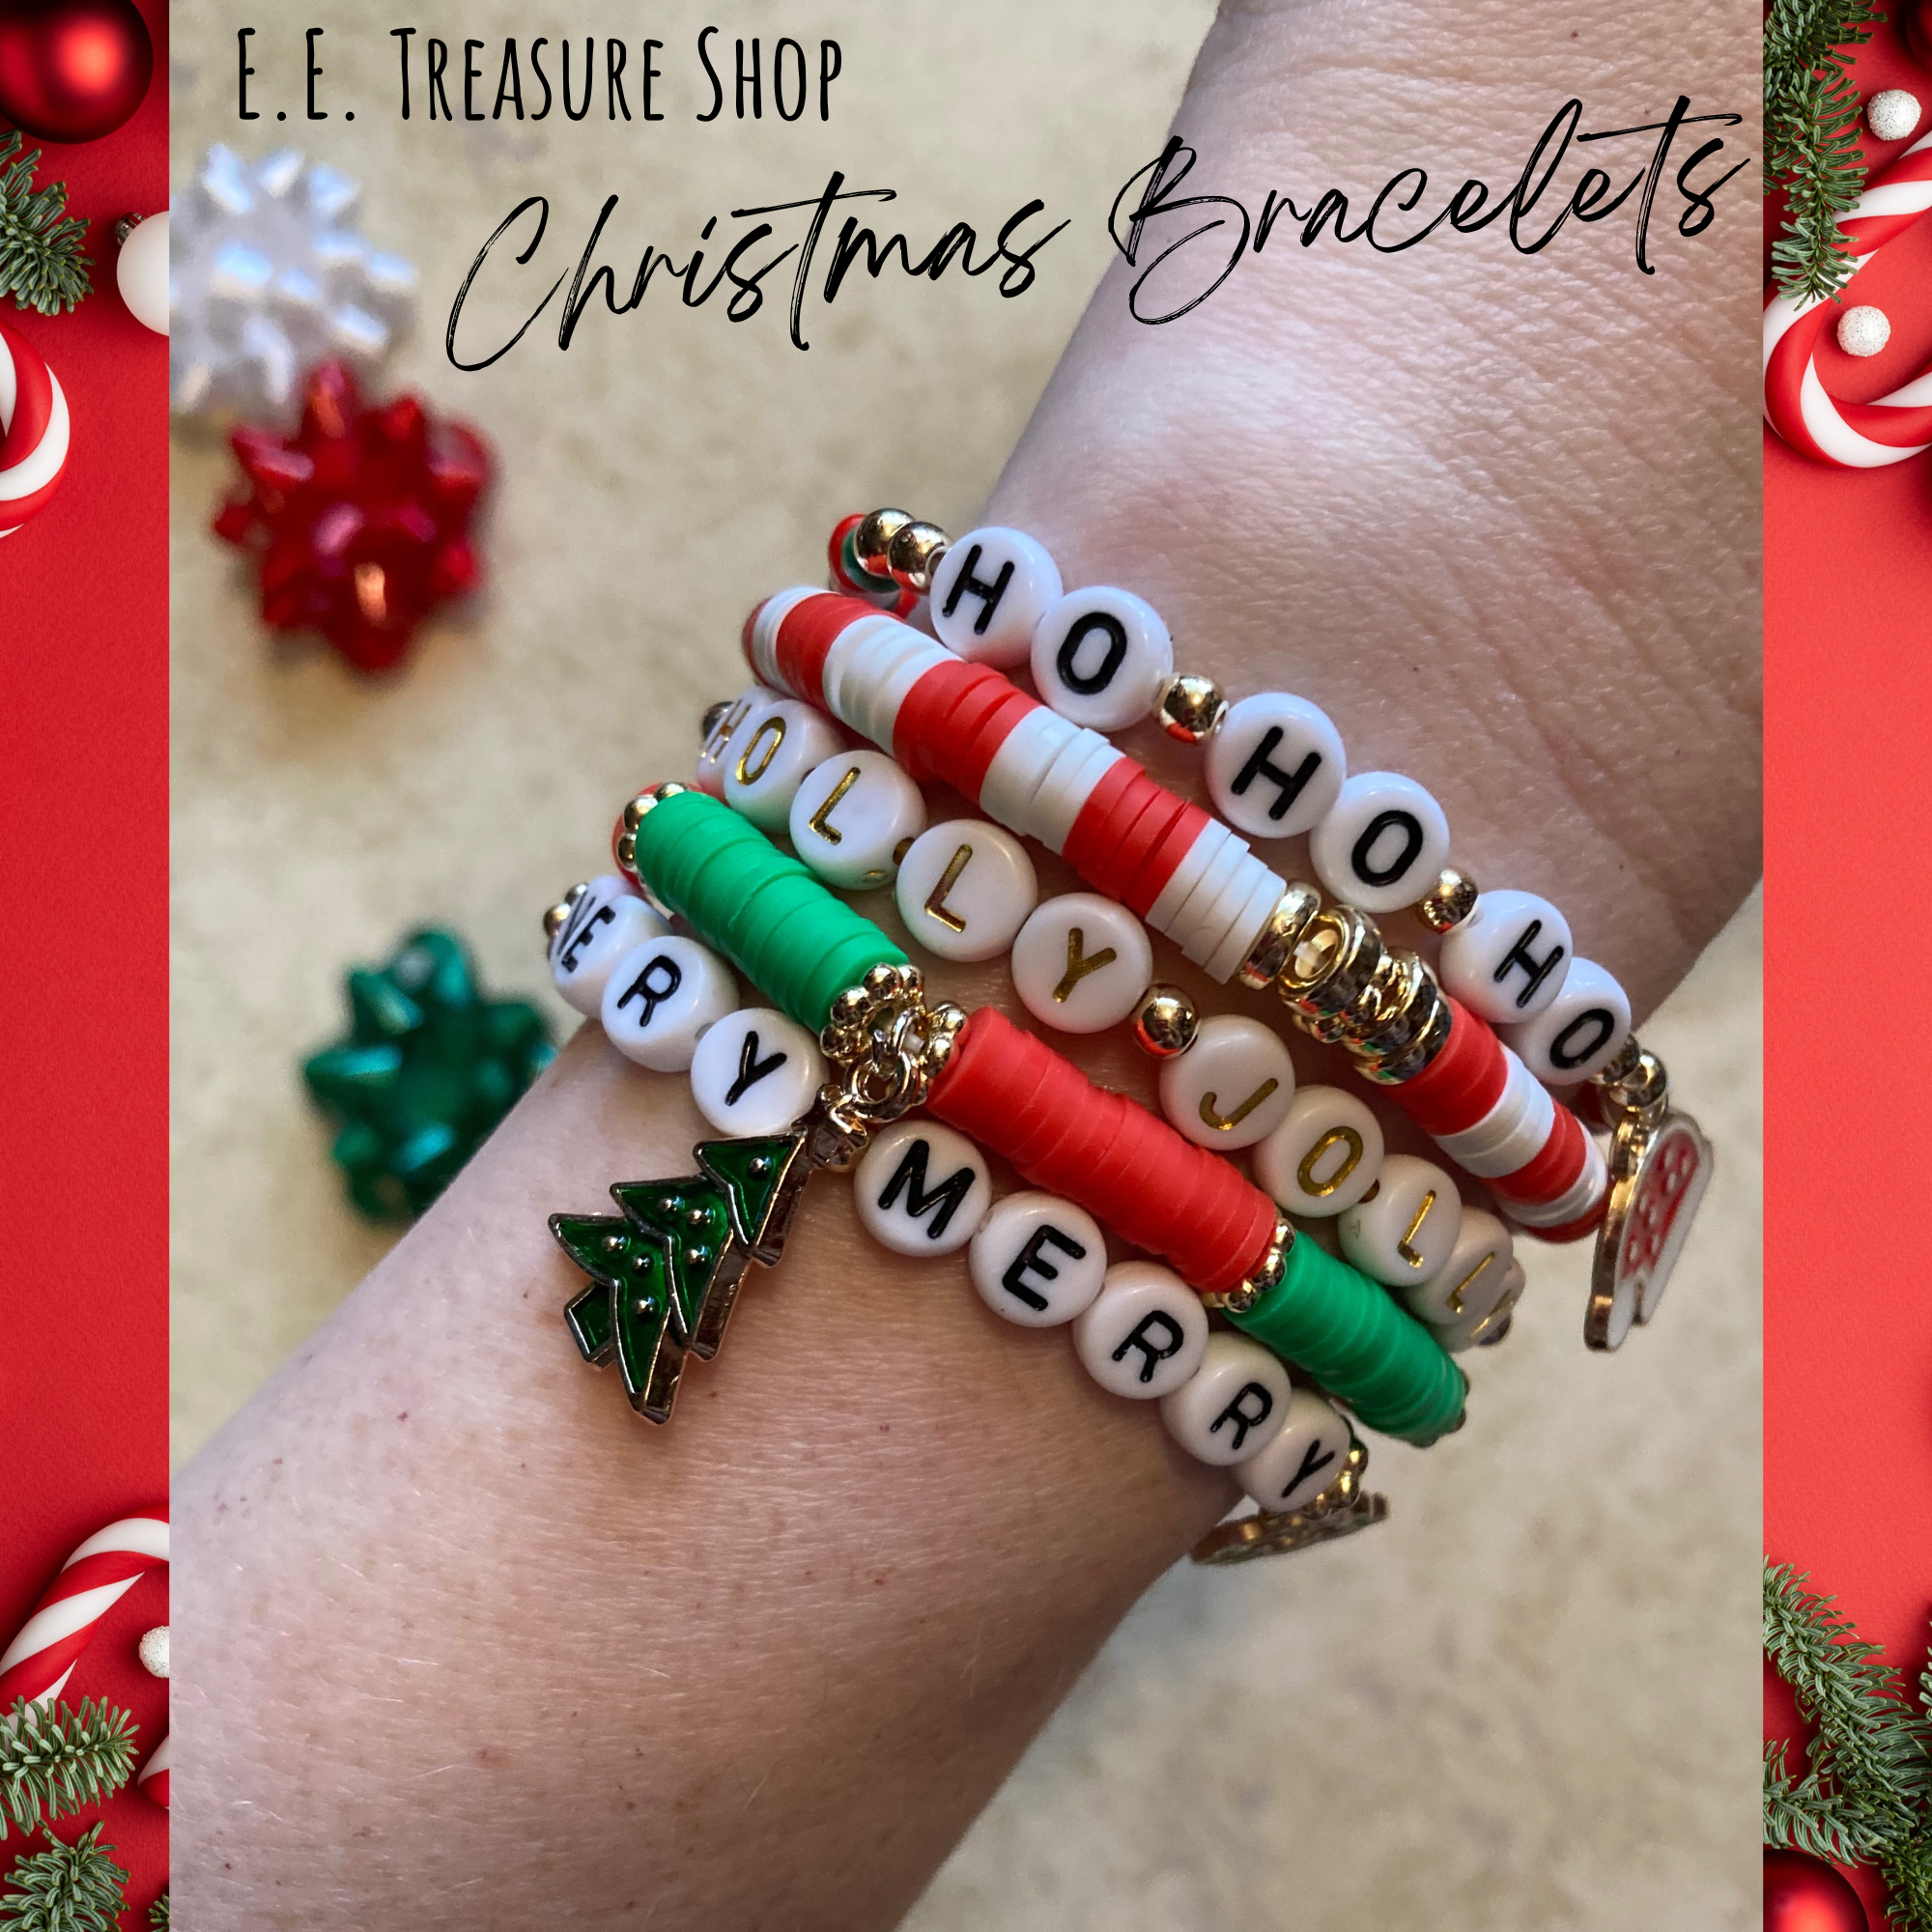 Gingerbread Man Bracelet with Red Quartz Hearts for the perfect Christmas  Gift for her